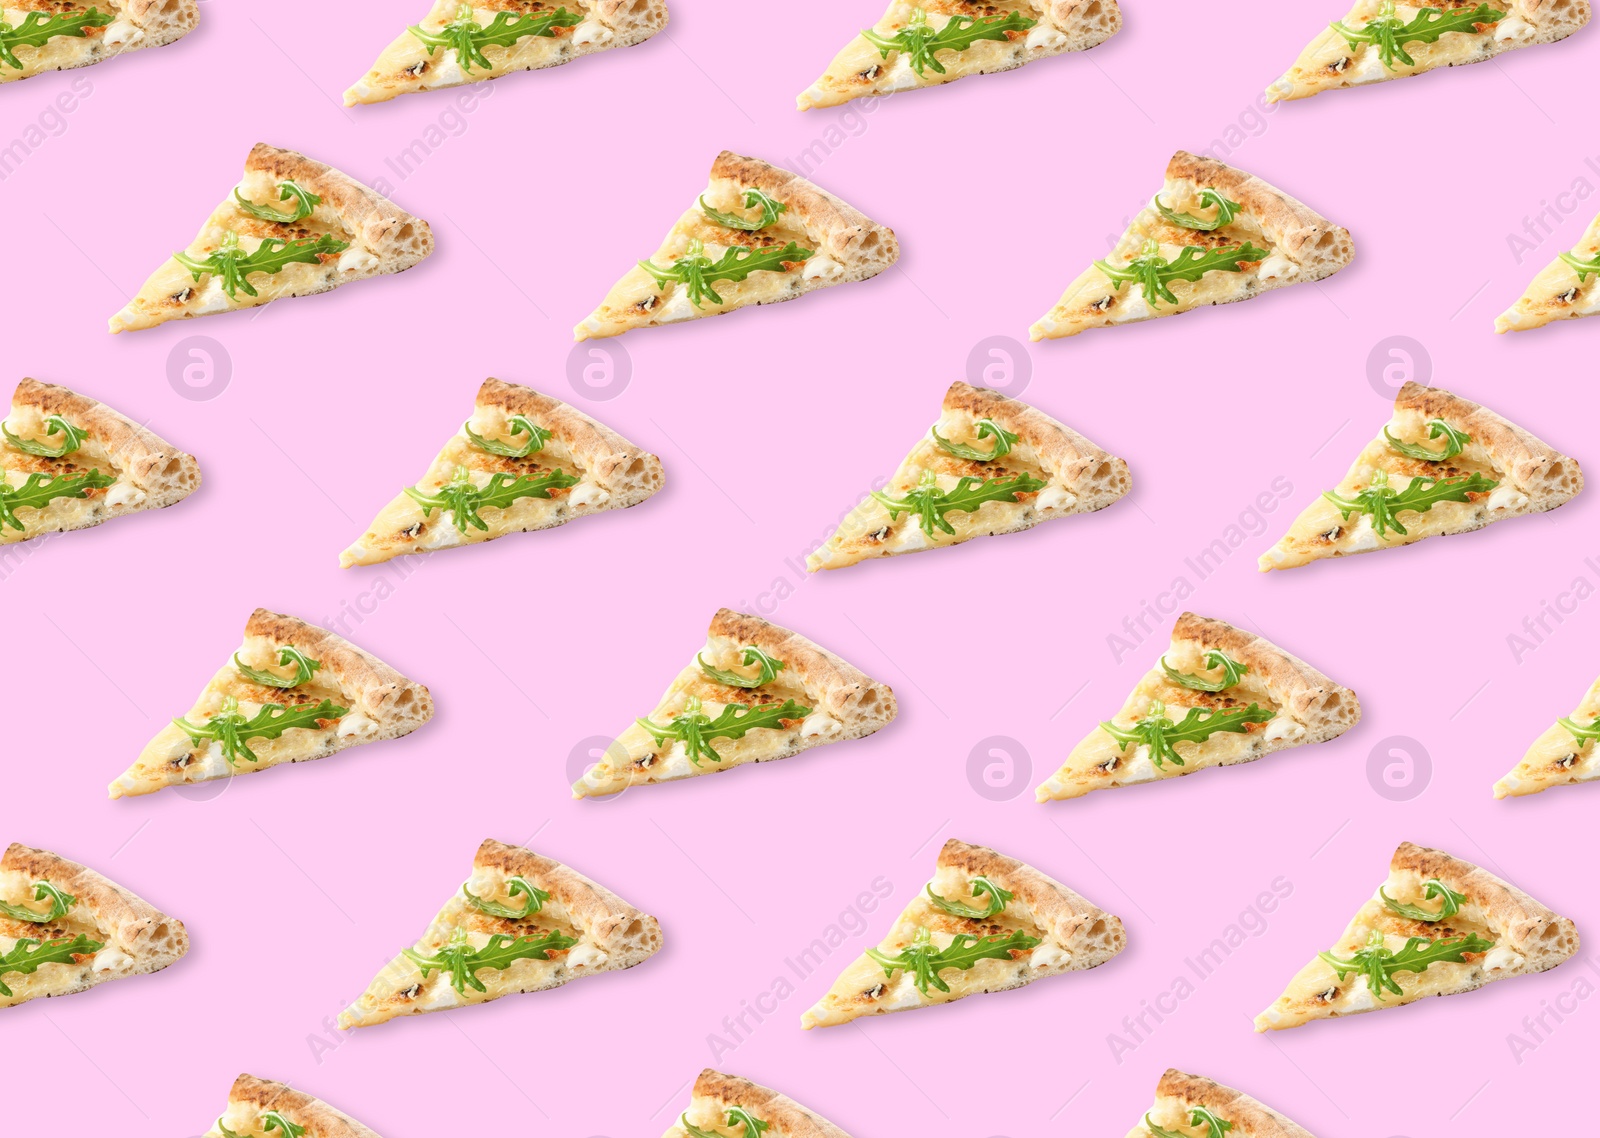 Image of Slices of delicious cheese pizzas on light pink background. Seamless pattern design